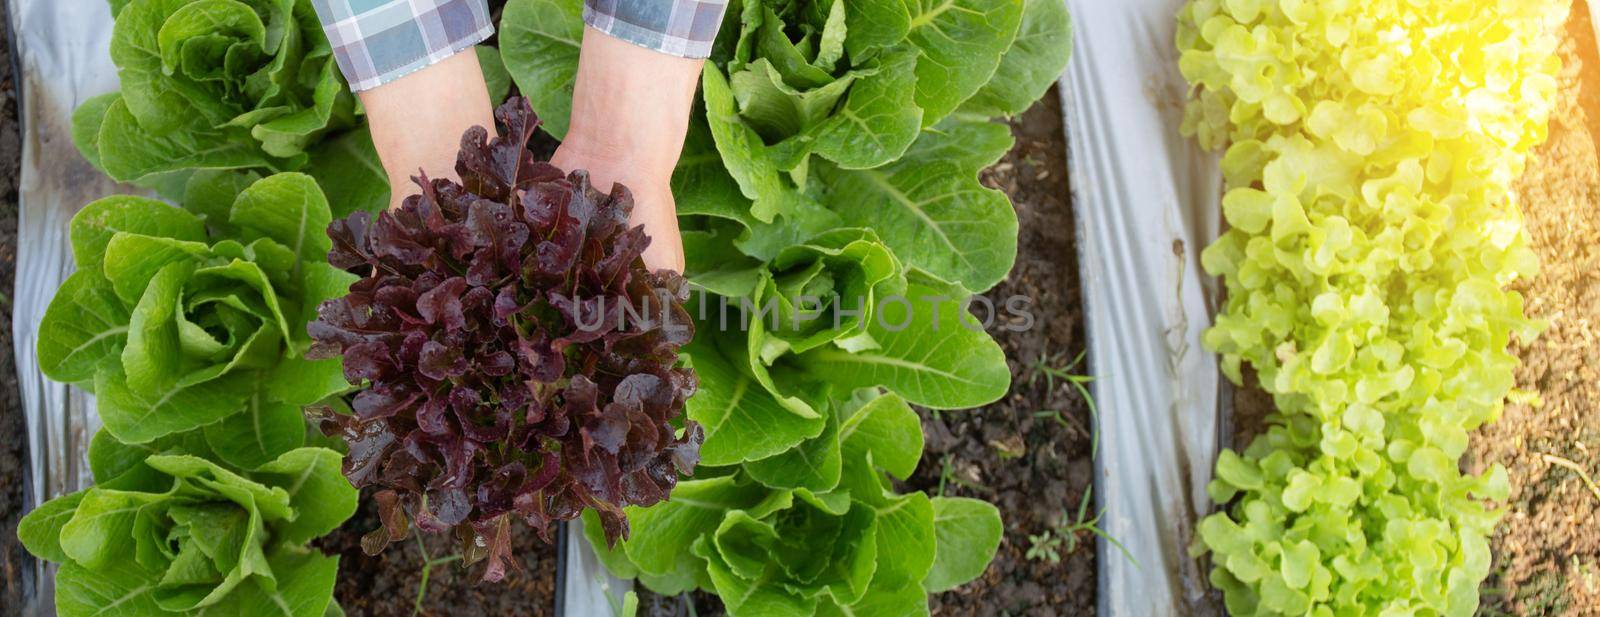 Closeup hands of man farmer checking and holding fresh organic vegetable in hydroponic farm, cultivation red oak lettuce for harvest agriculture with business, healthy food concept, banner website.